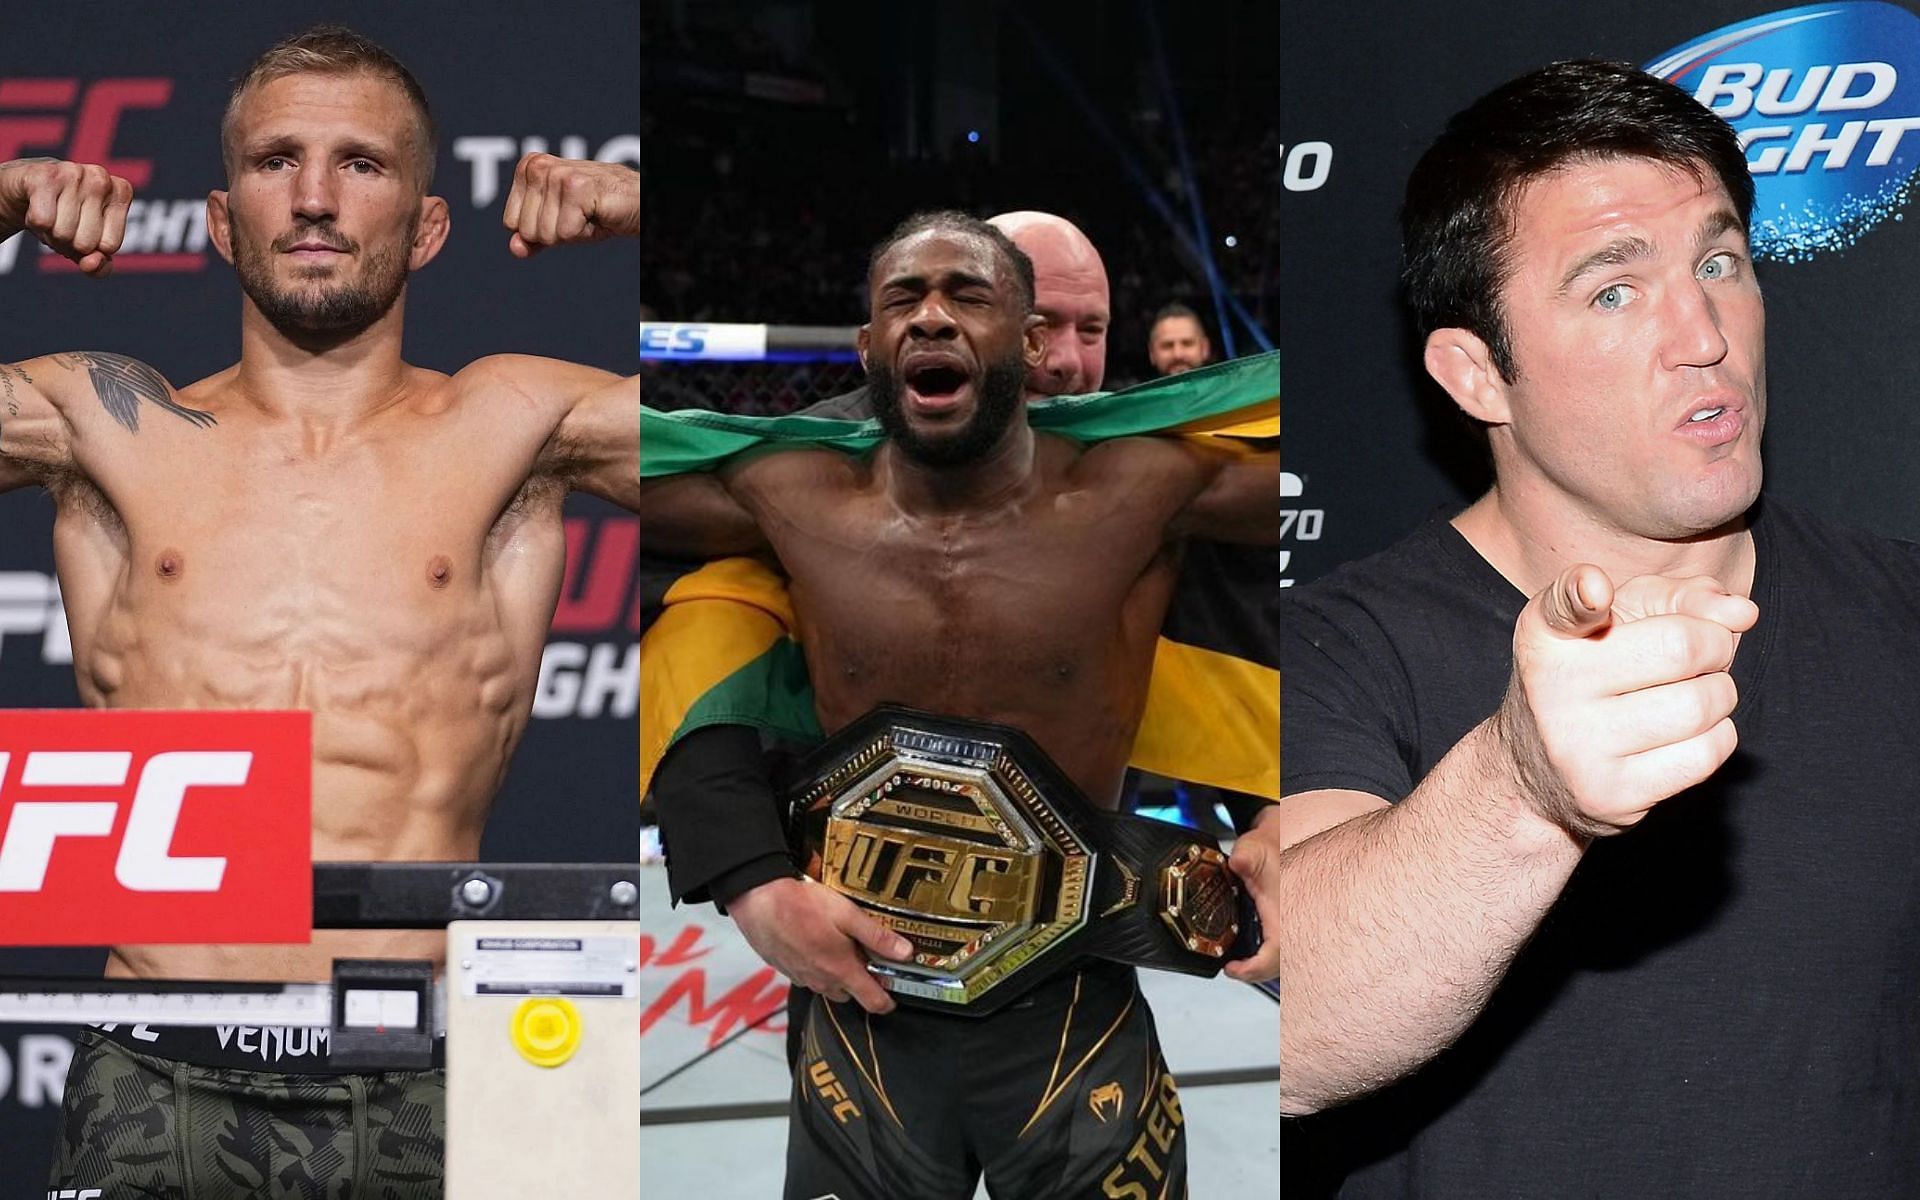 T.J. Dillashaw (left), Aljamain Sterling (center), and Chael Sonnen (right) [Images courtesy of Getty]